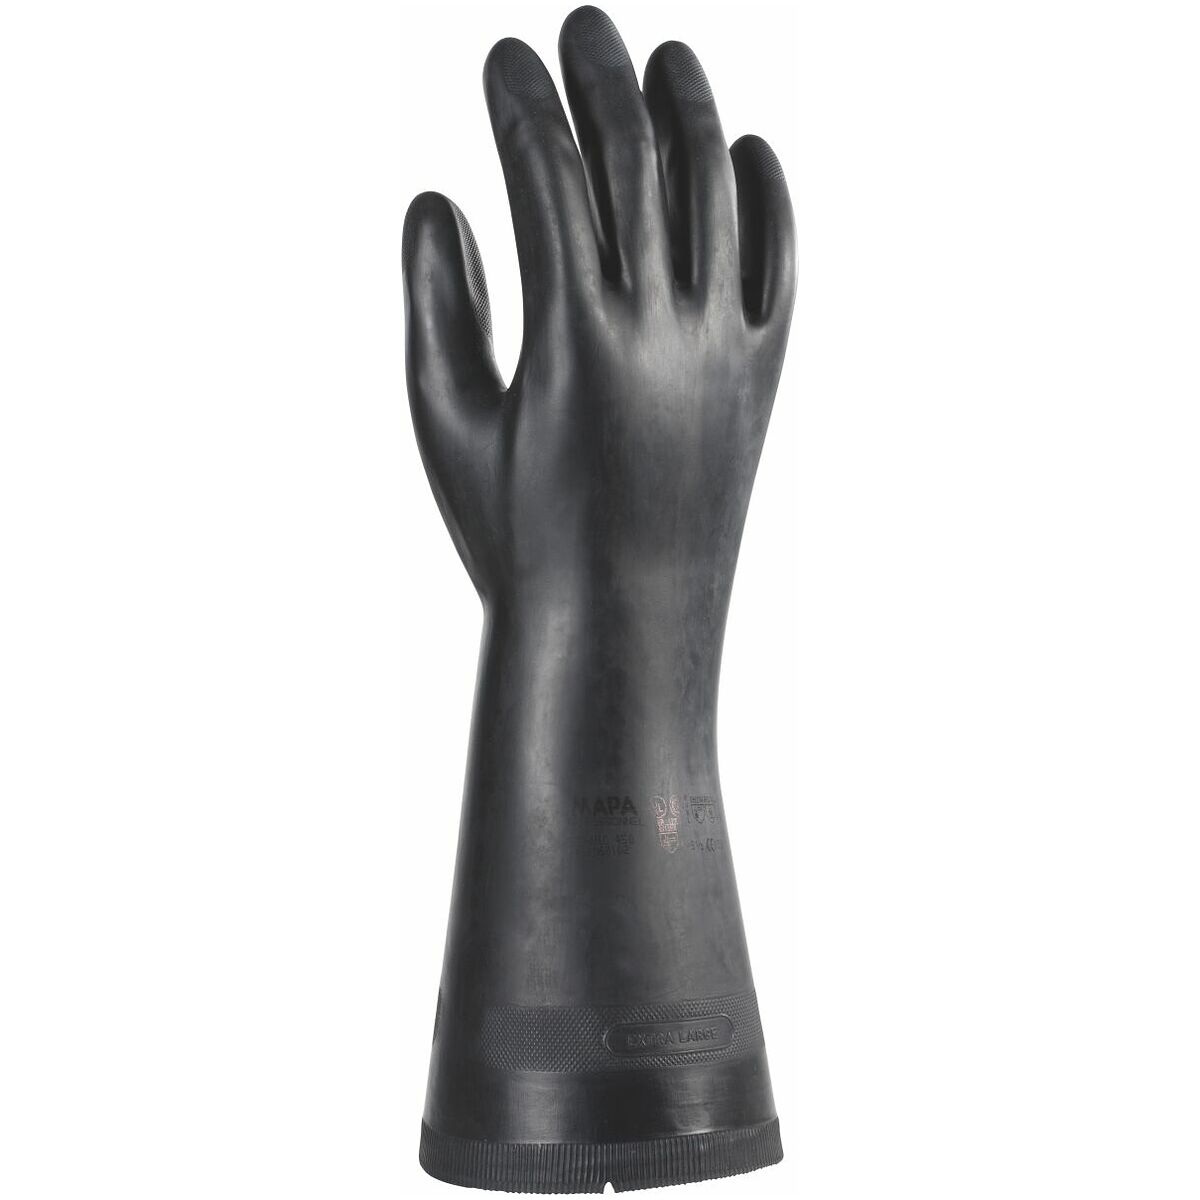 Pair of chemical protective gloves UltraNeo 450